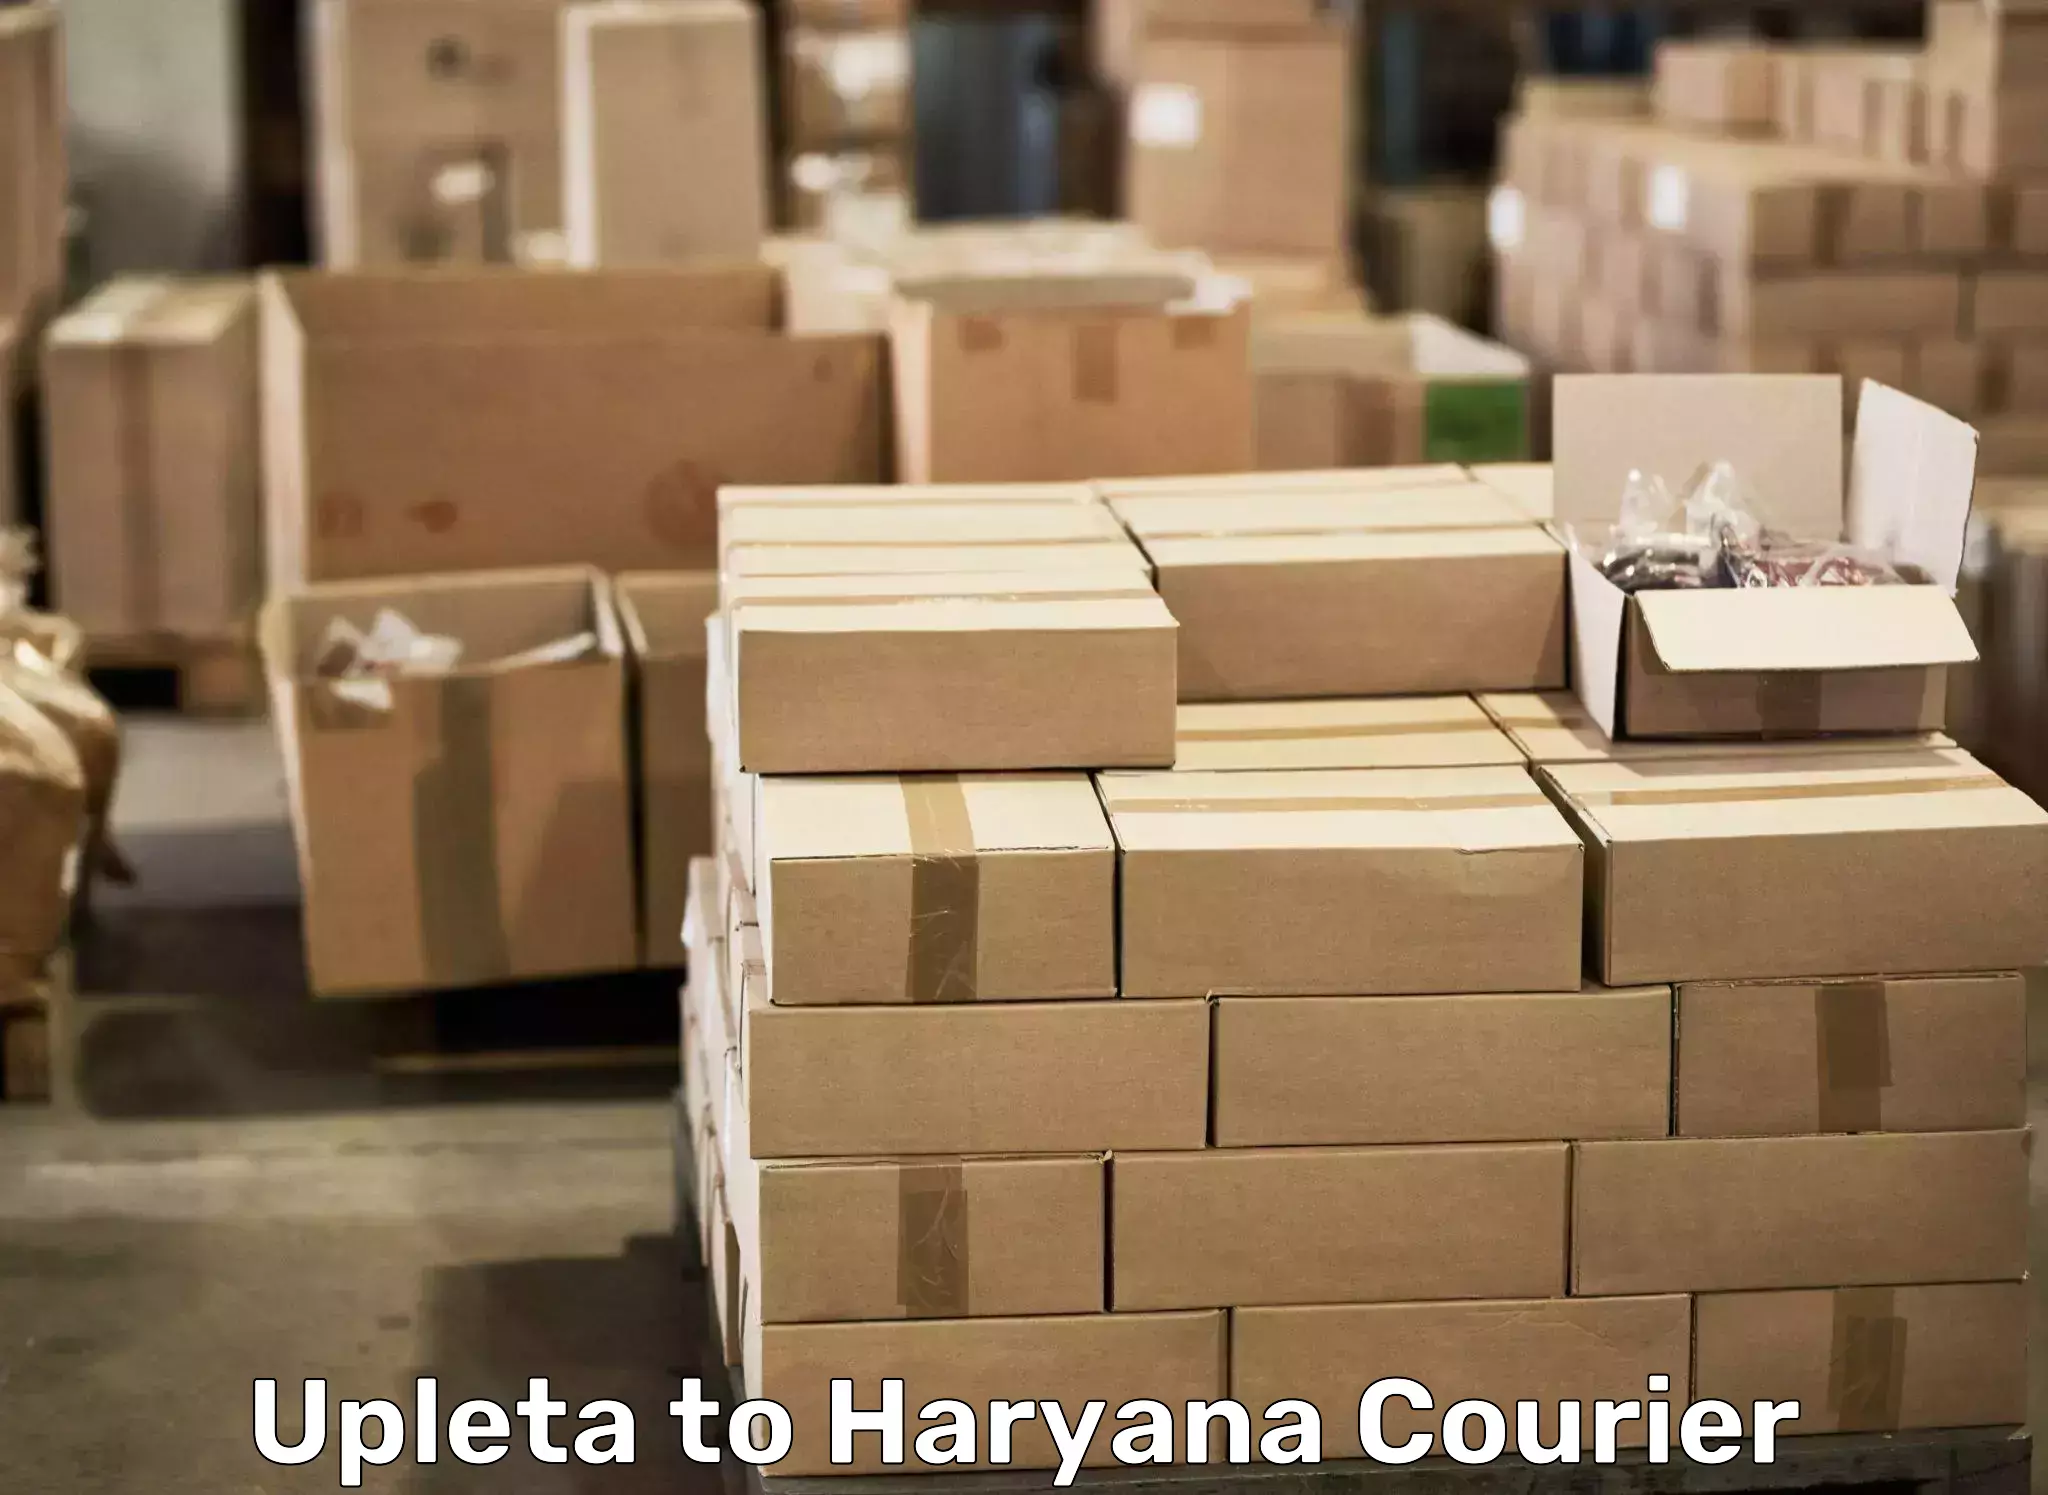 Efficient packing and moving Upleta to Gurugram